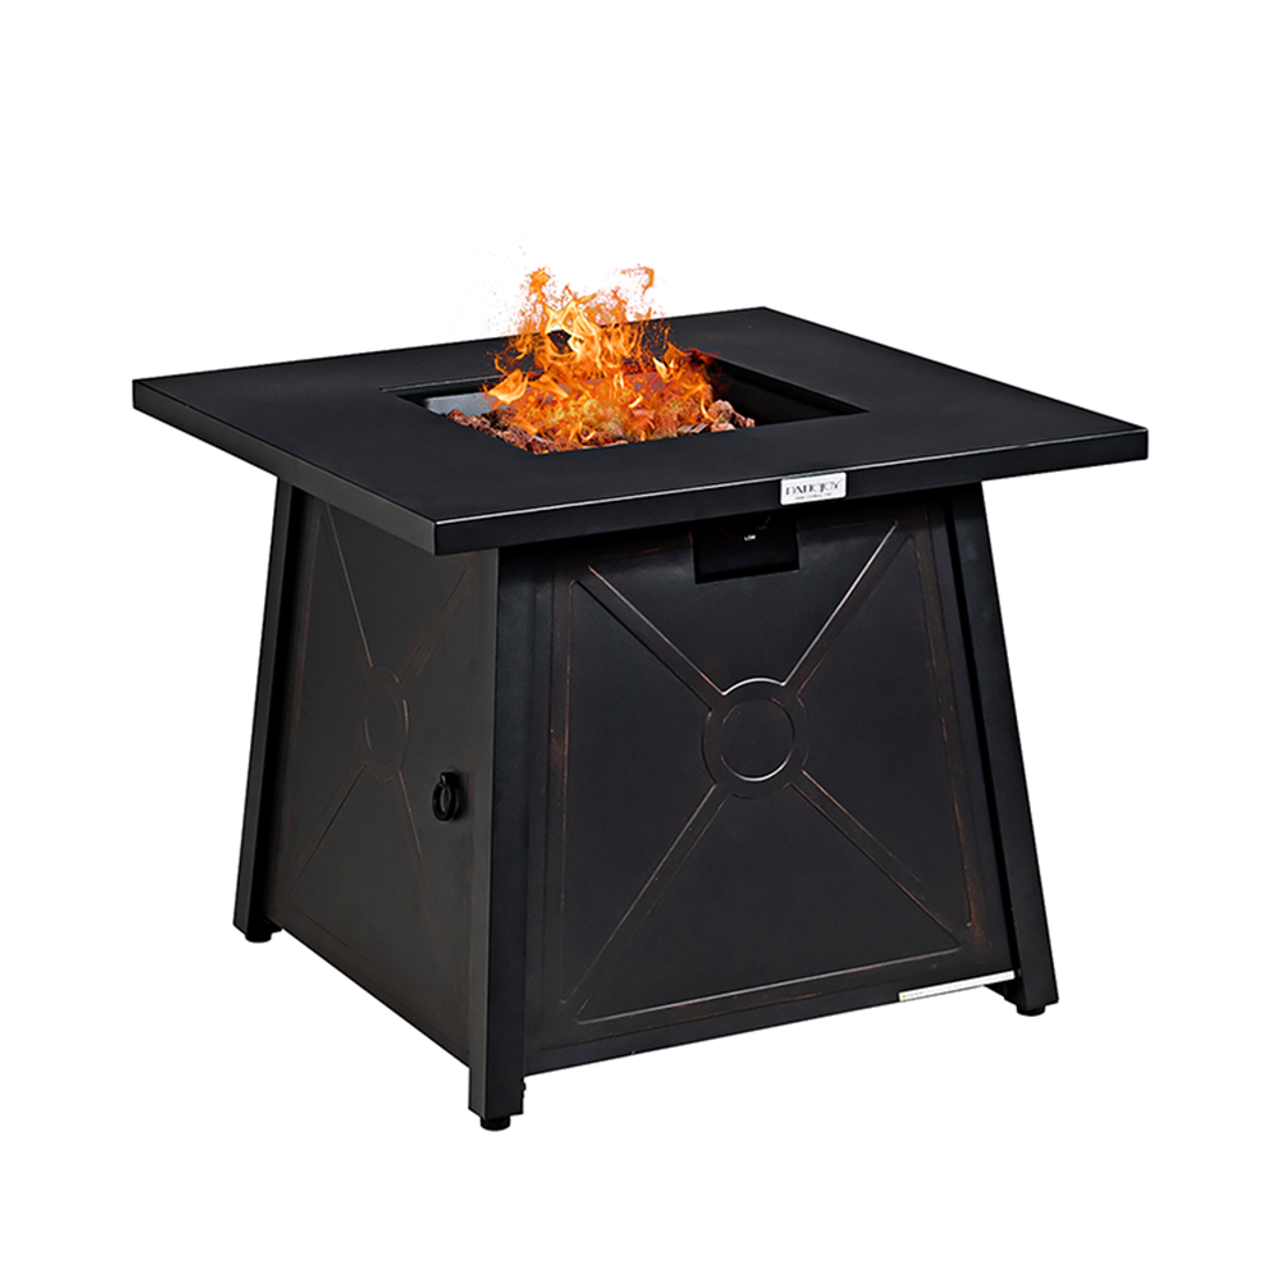 30-Inch Square Propane Gas Fire Pit Table with Weather Cover product image